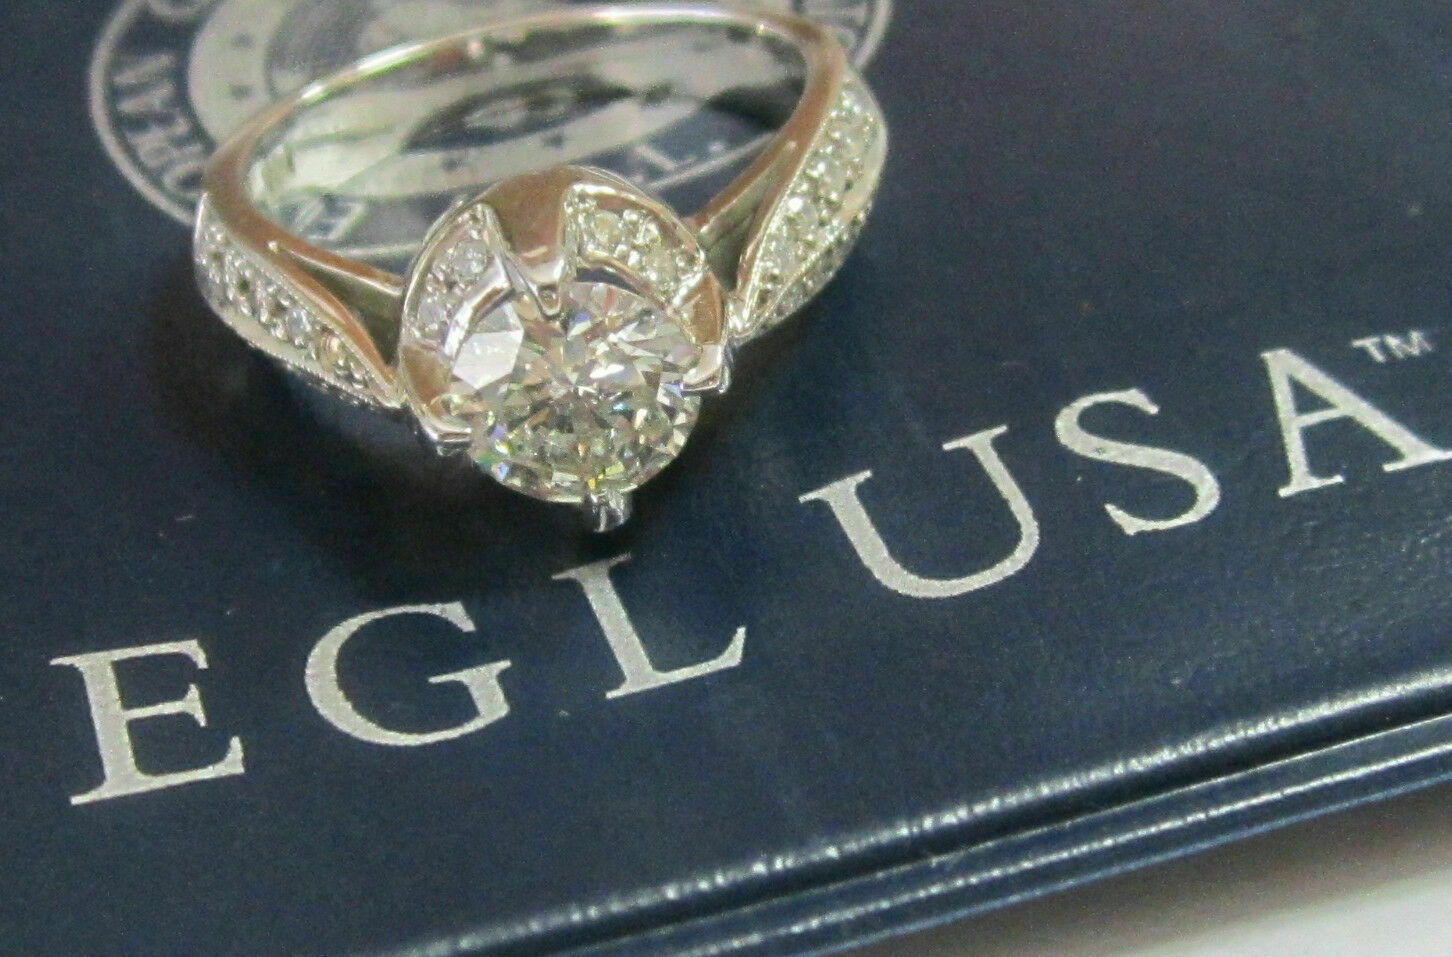 EGL Certified Center 1.00 Ct Round Cut Diamond Solitaire Engagement Ring 14k WG